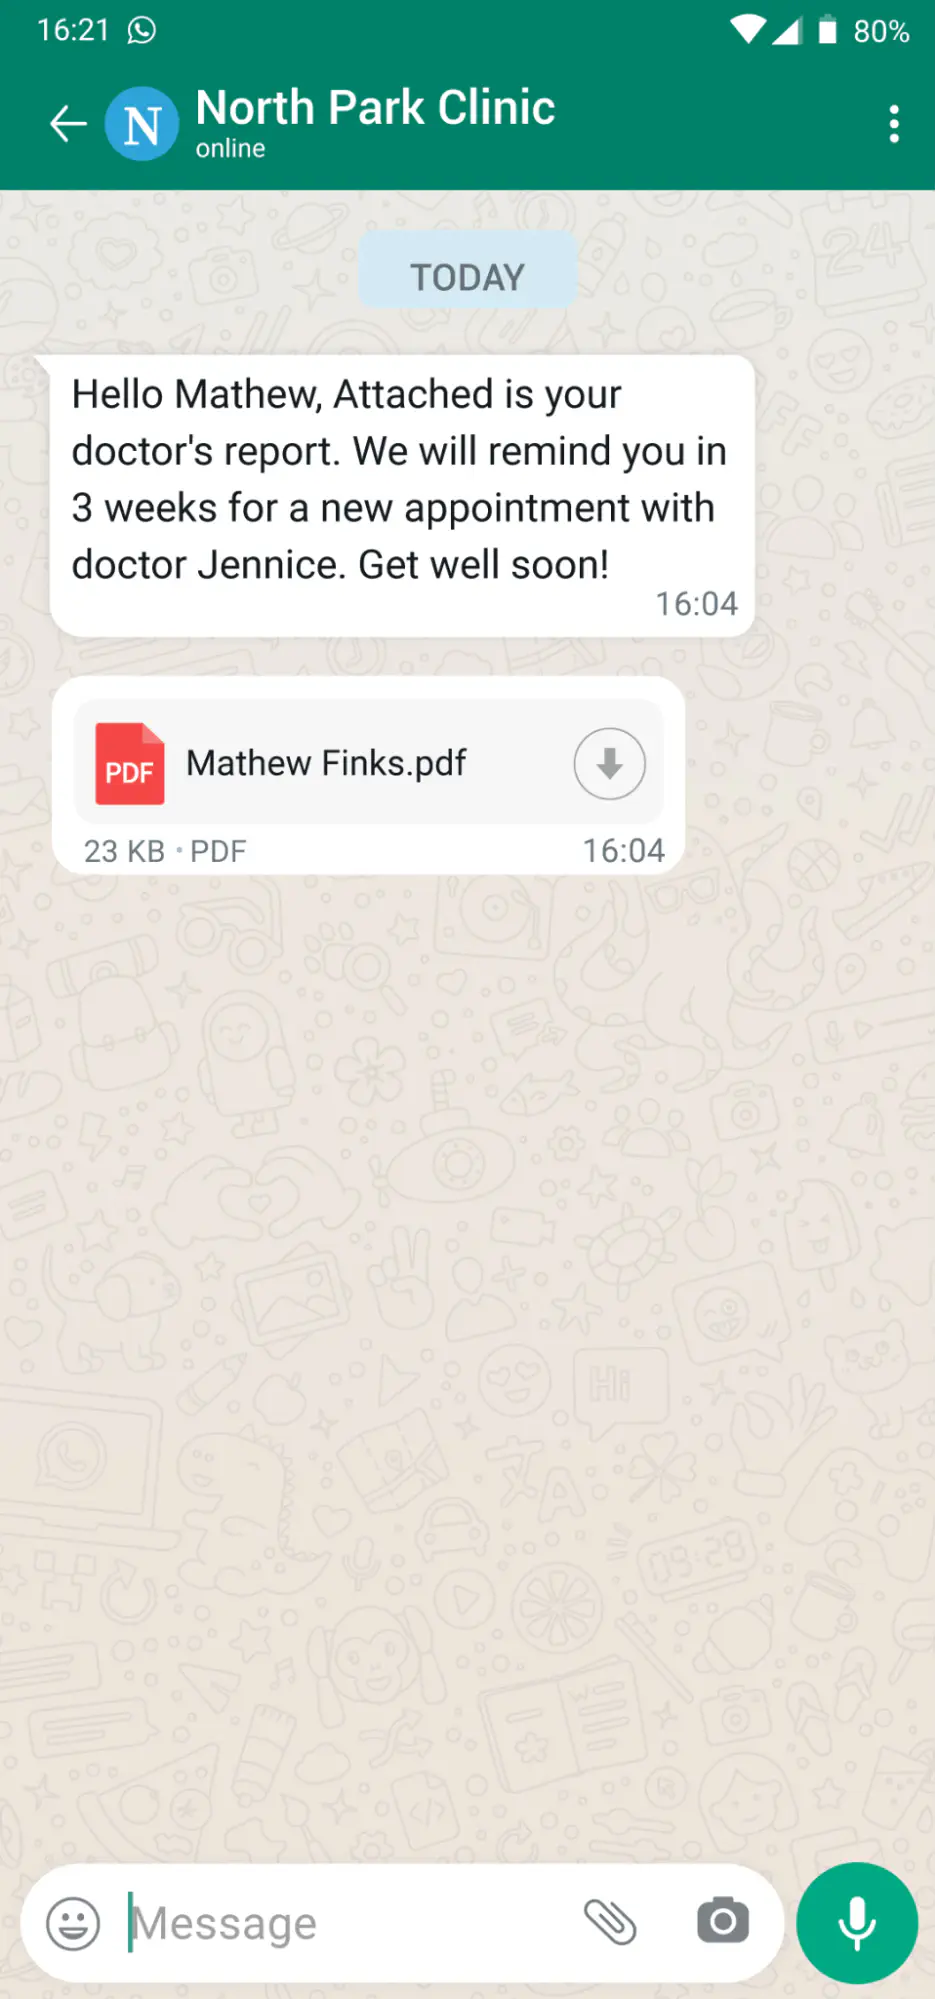 WhatsApp chatbot sending medical documents and test results.